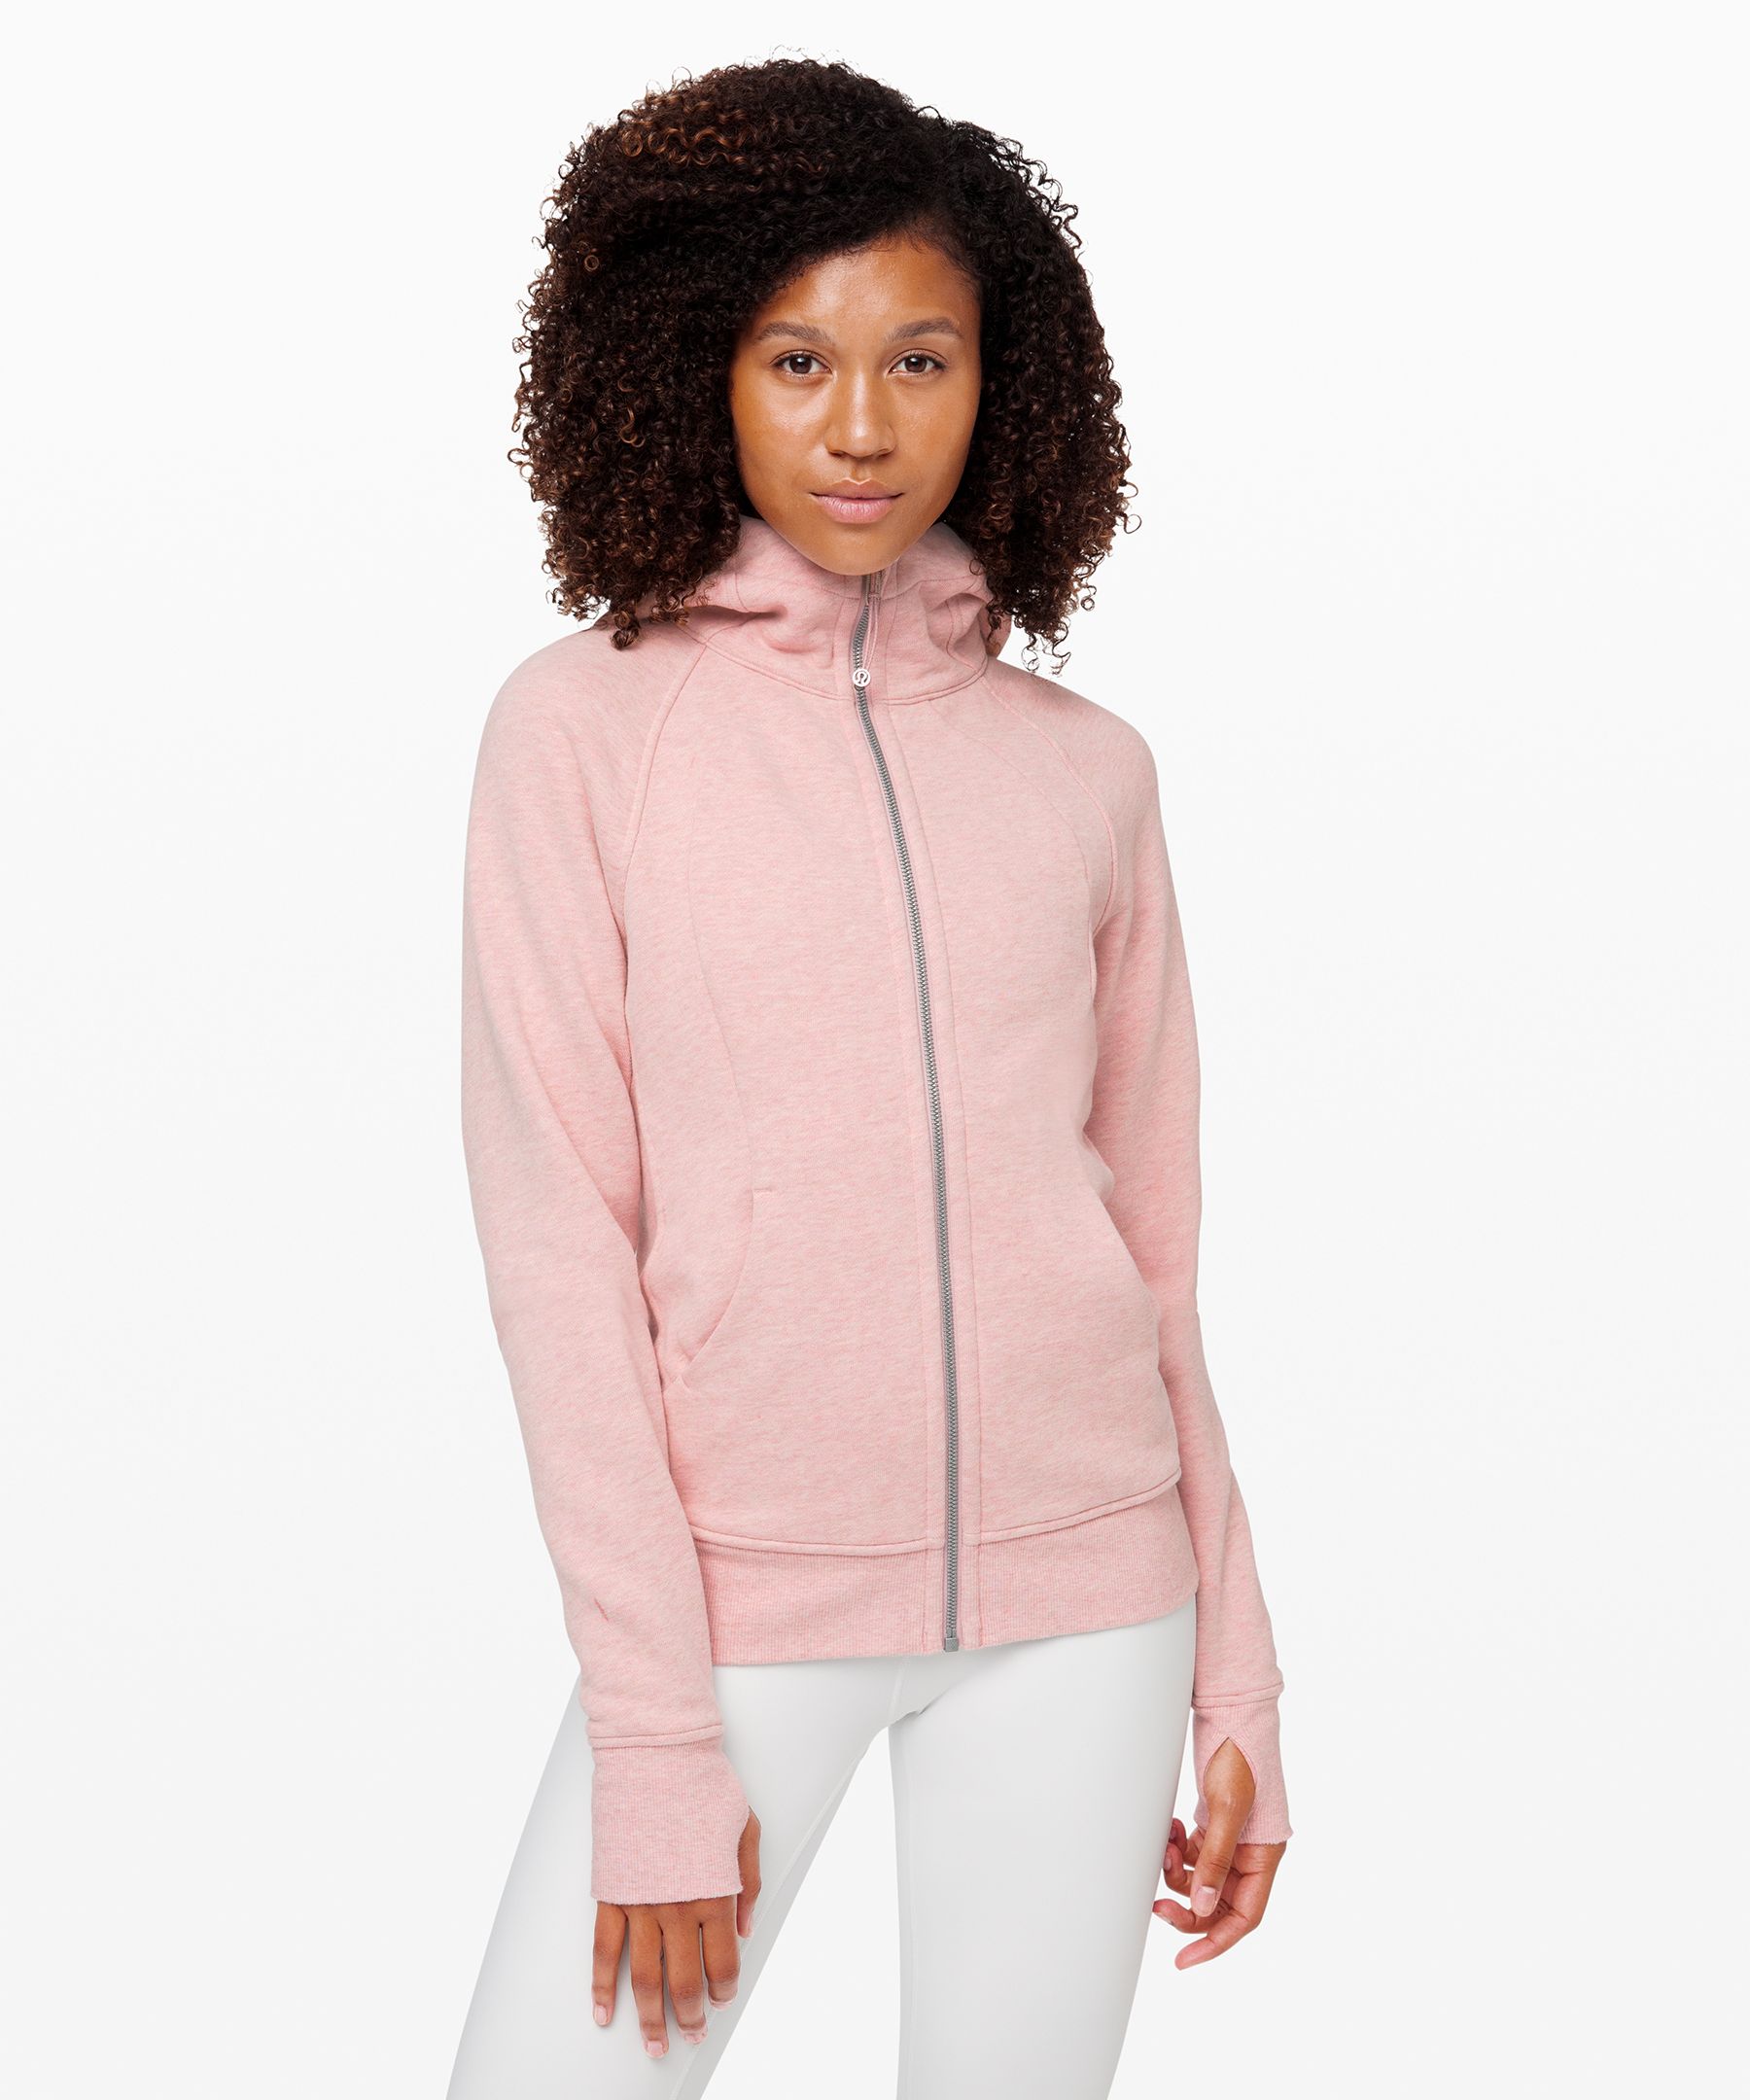 Comment LINK to shop this dupe for the Lululemon Full Zip Scuba